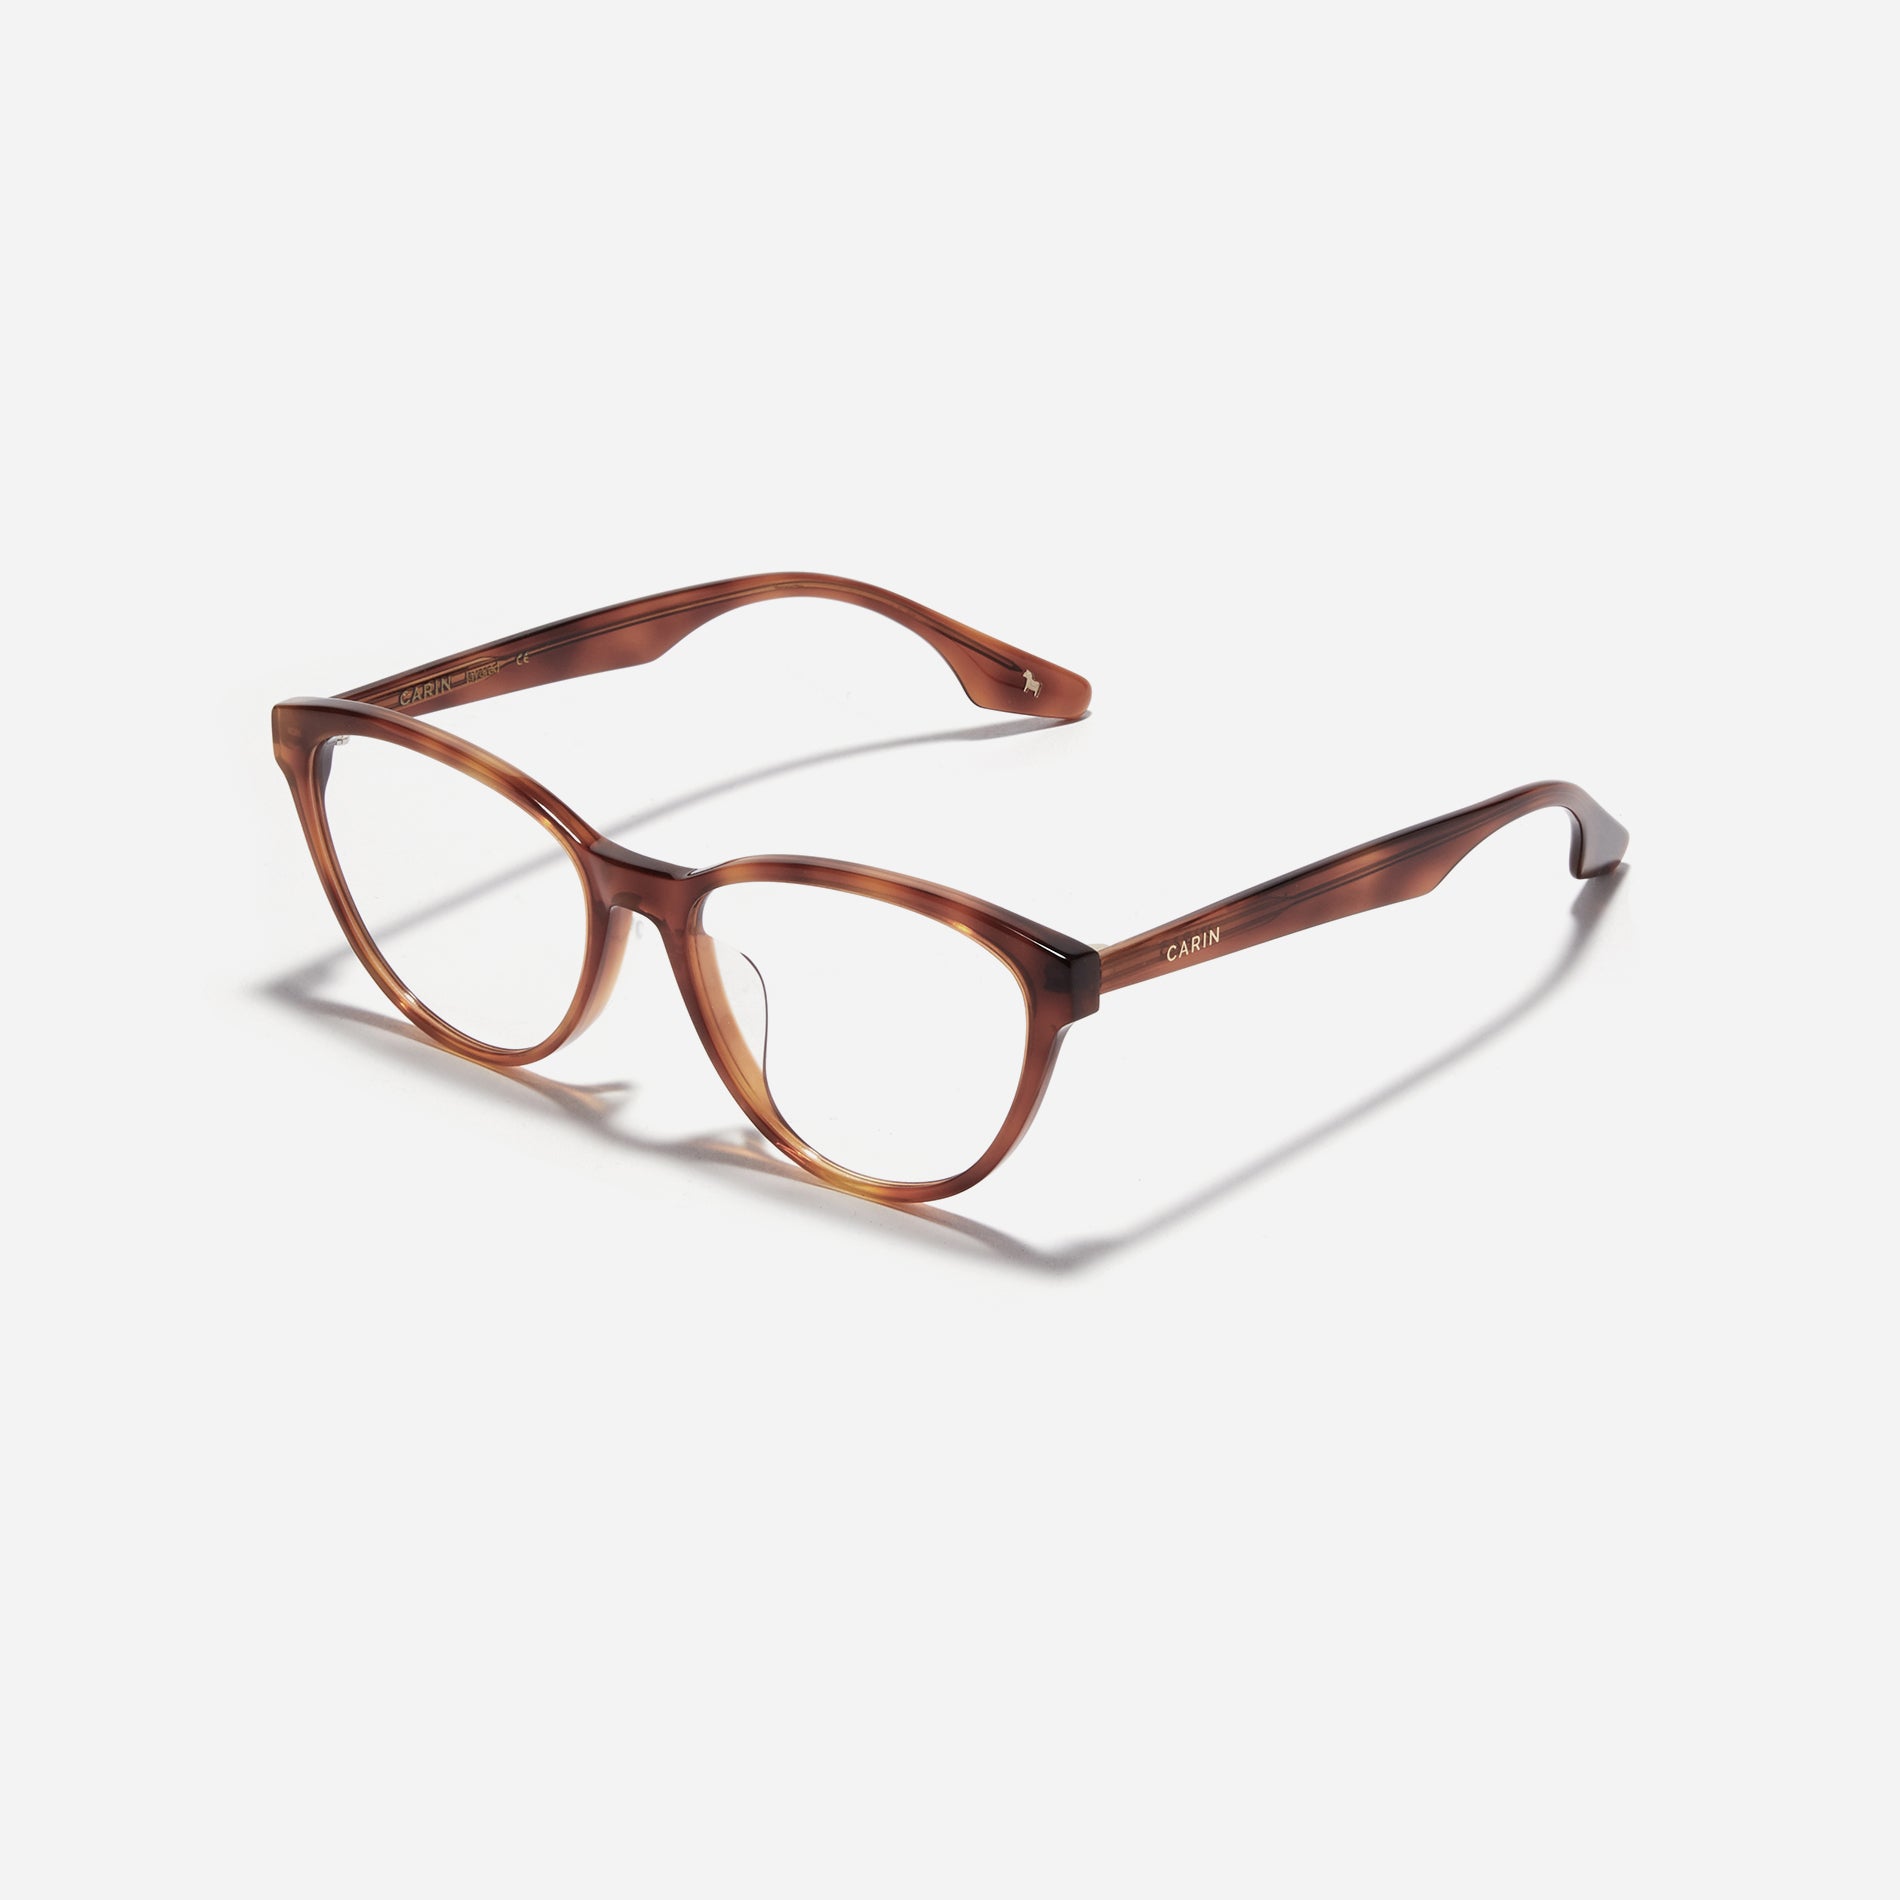 Lucy are cat-eye horn-rimmed eyeglasses showcasing a contemporary reinterpretation of retro aesthetics. Their eye-catching design and various color options offer a trendy look, harmonizing seamlessly with the natural lines of the face.